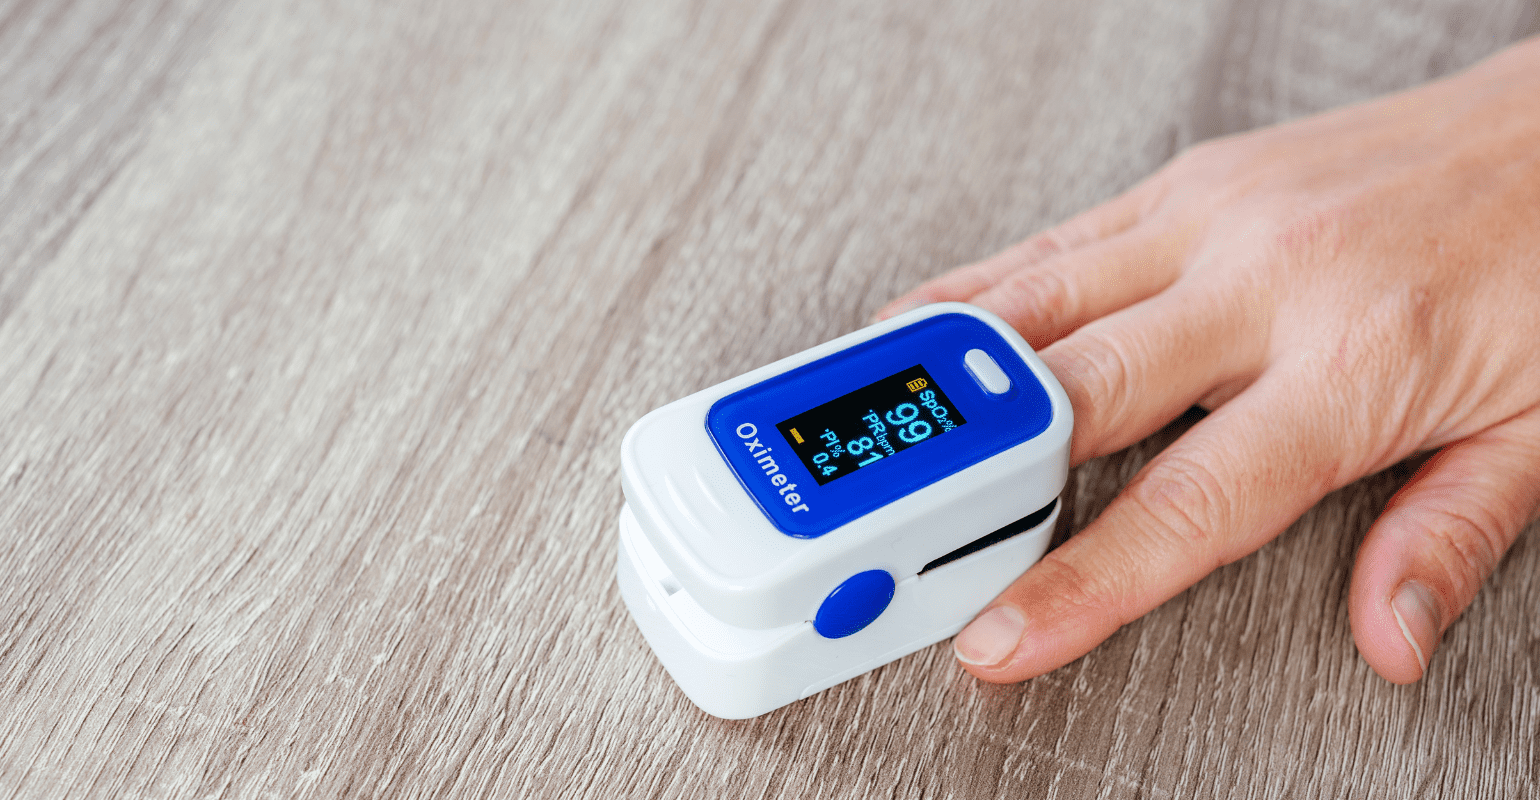 Improving population wellness with remote monitoring devices